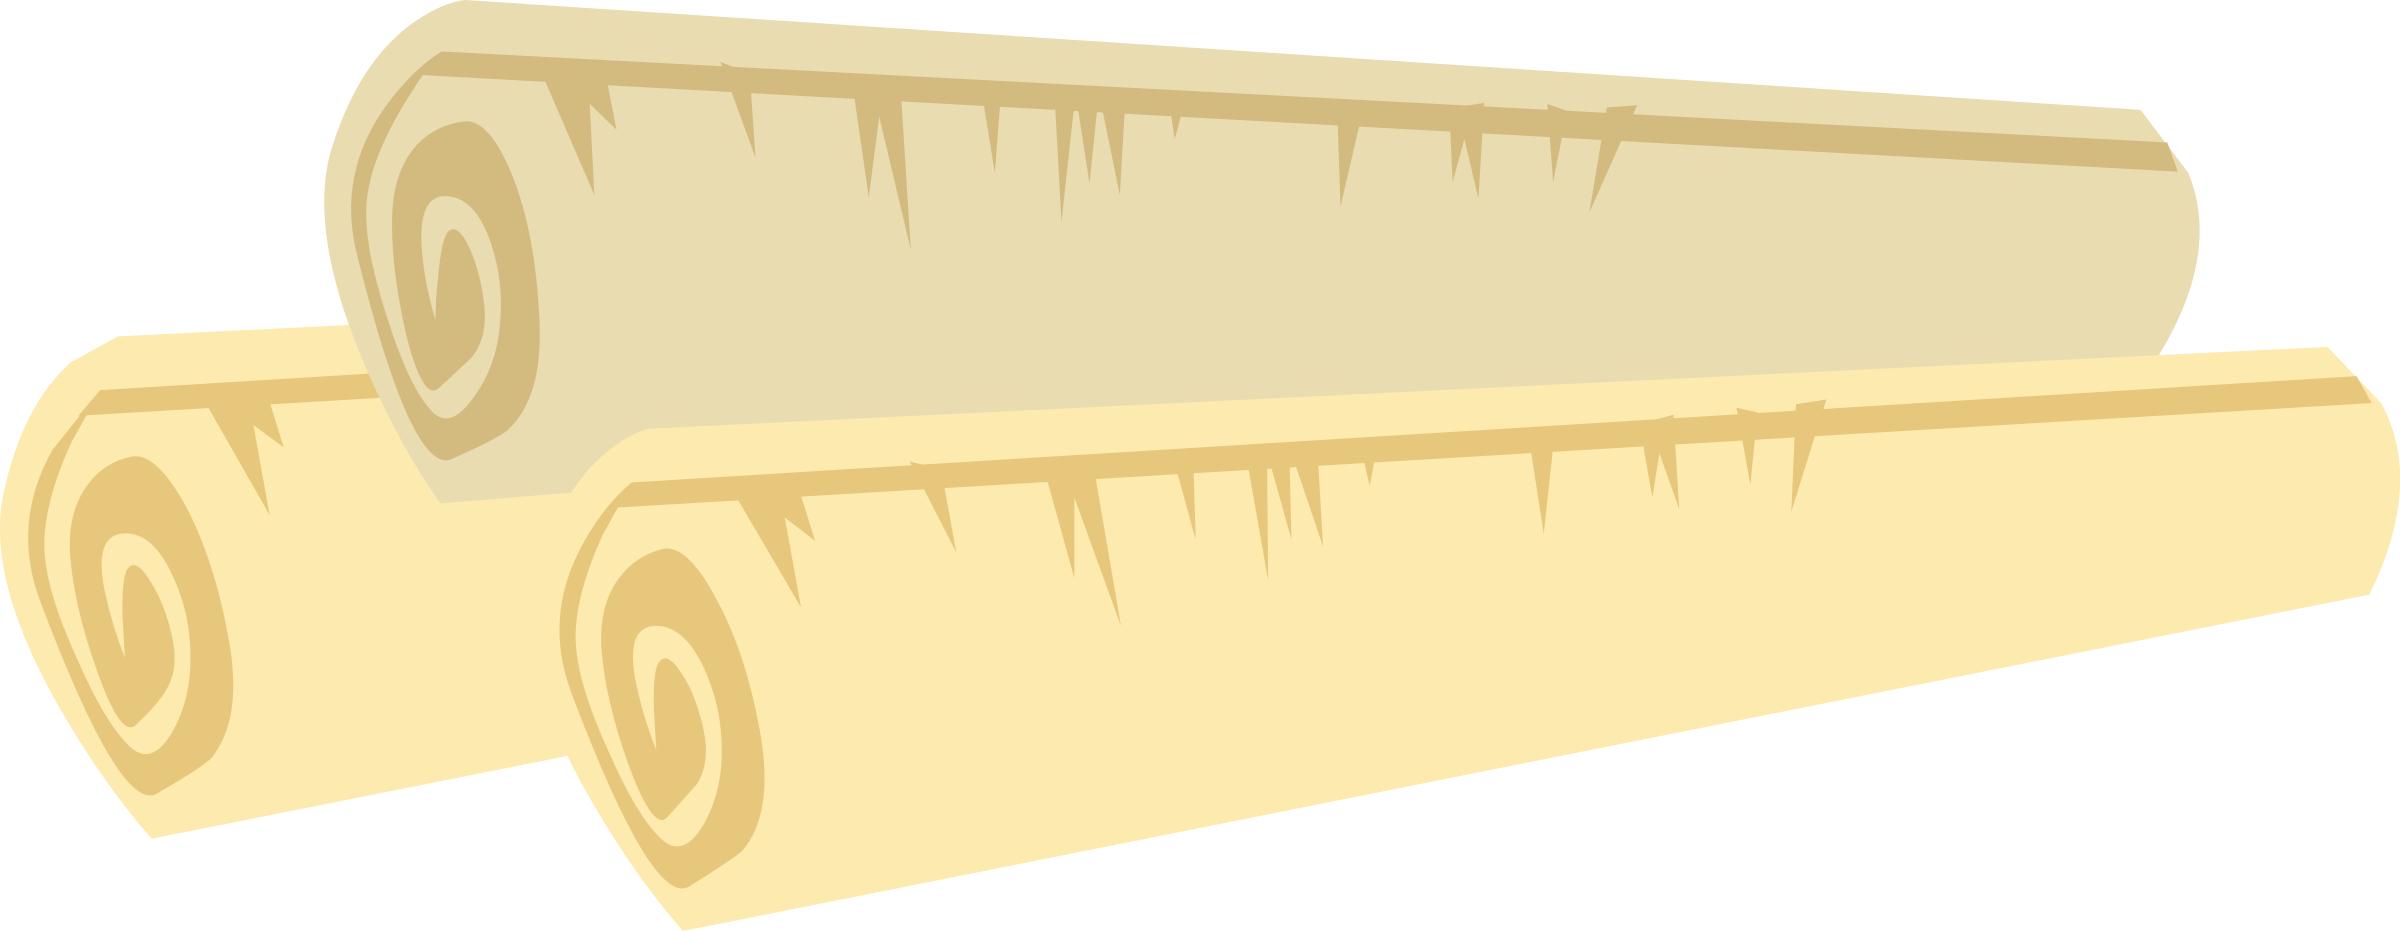 Firebog Rolled Up Paper png